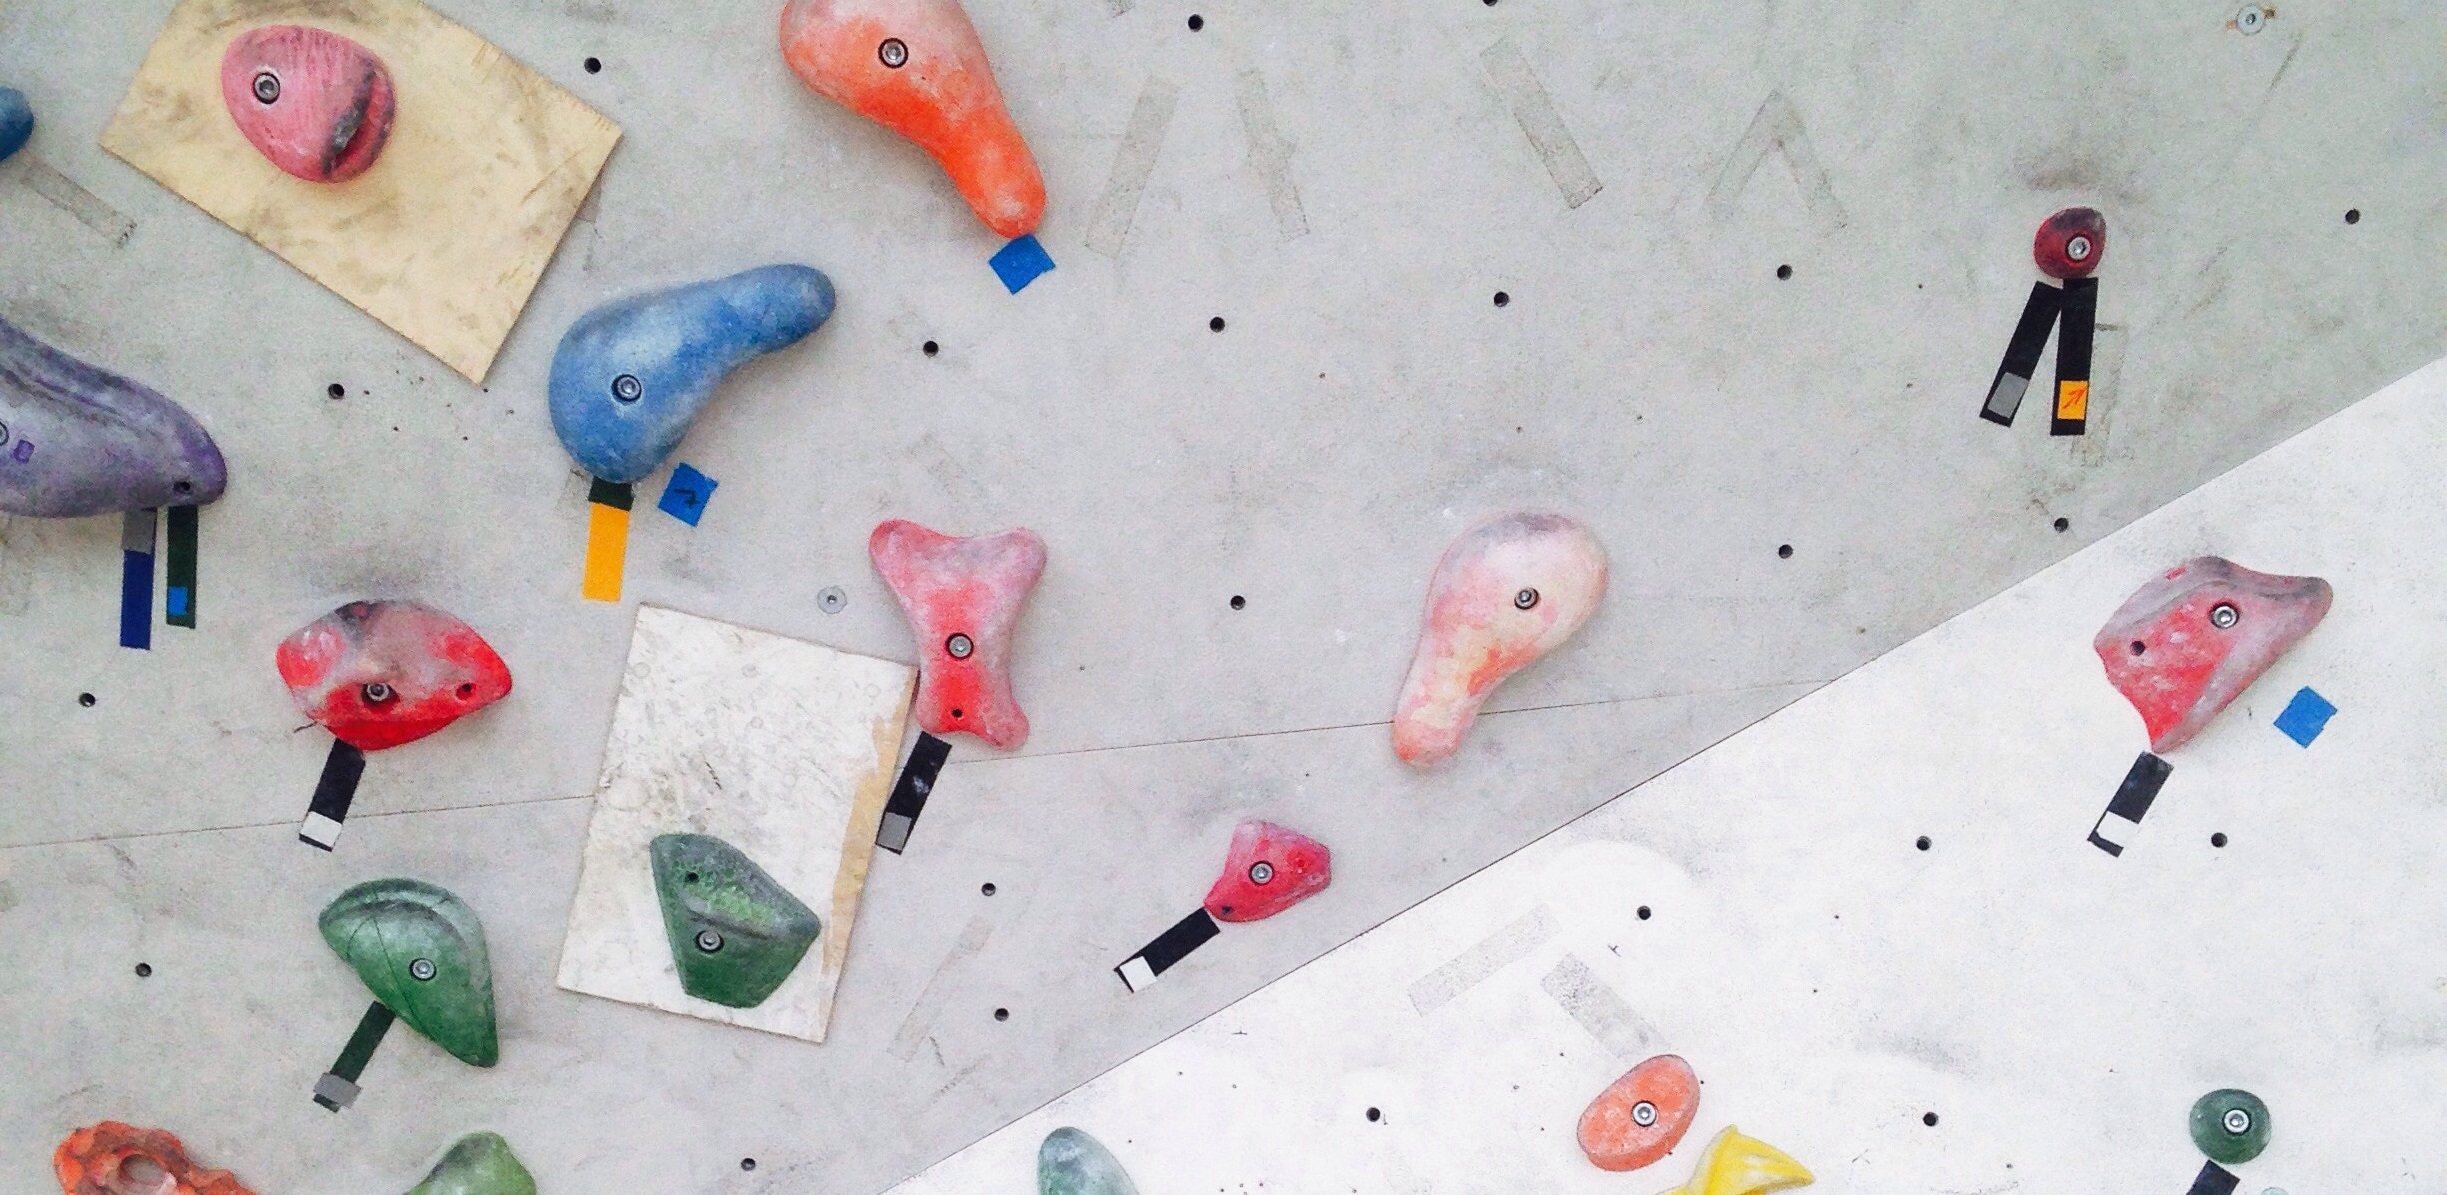 Top 11 most exciting climbing gyms in London